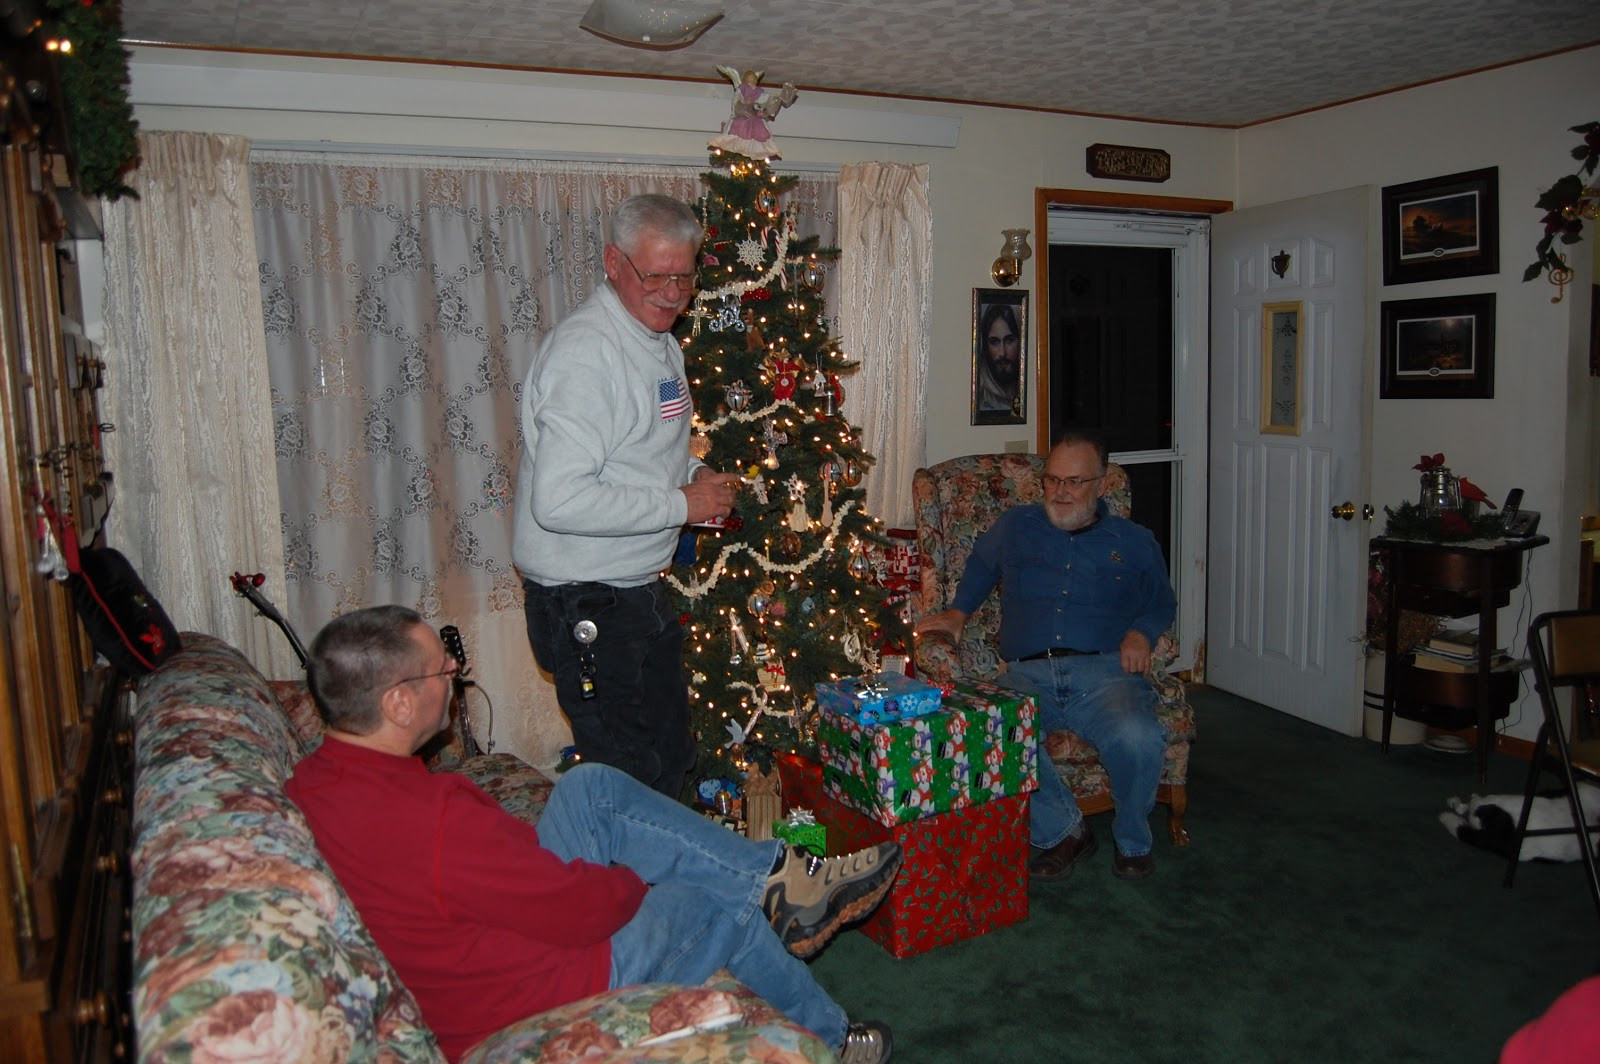 Old Fashioned Christmas Party Ideas
 Nana Porcupine Dec 21st Our Annual Party "AN OLD